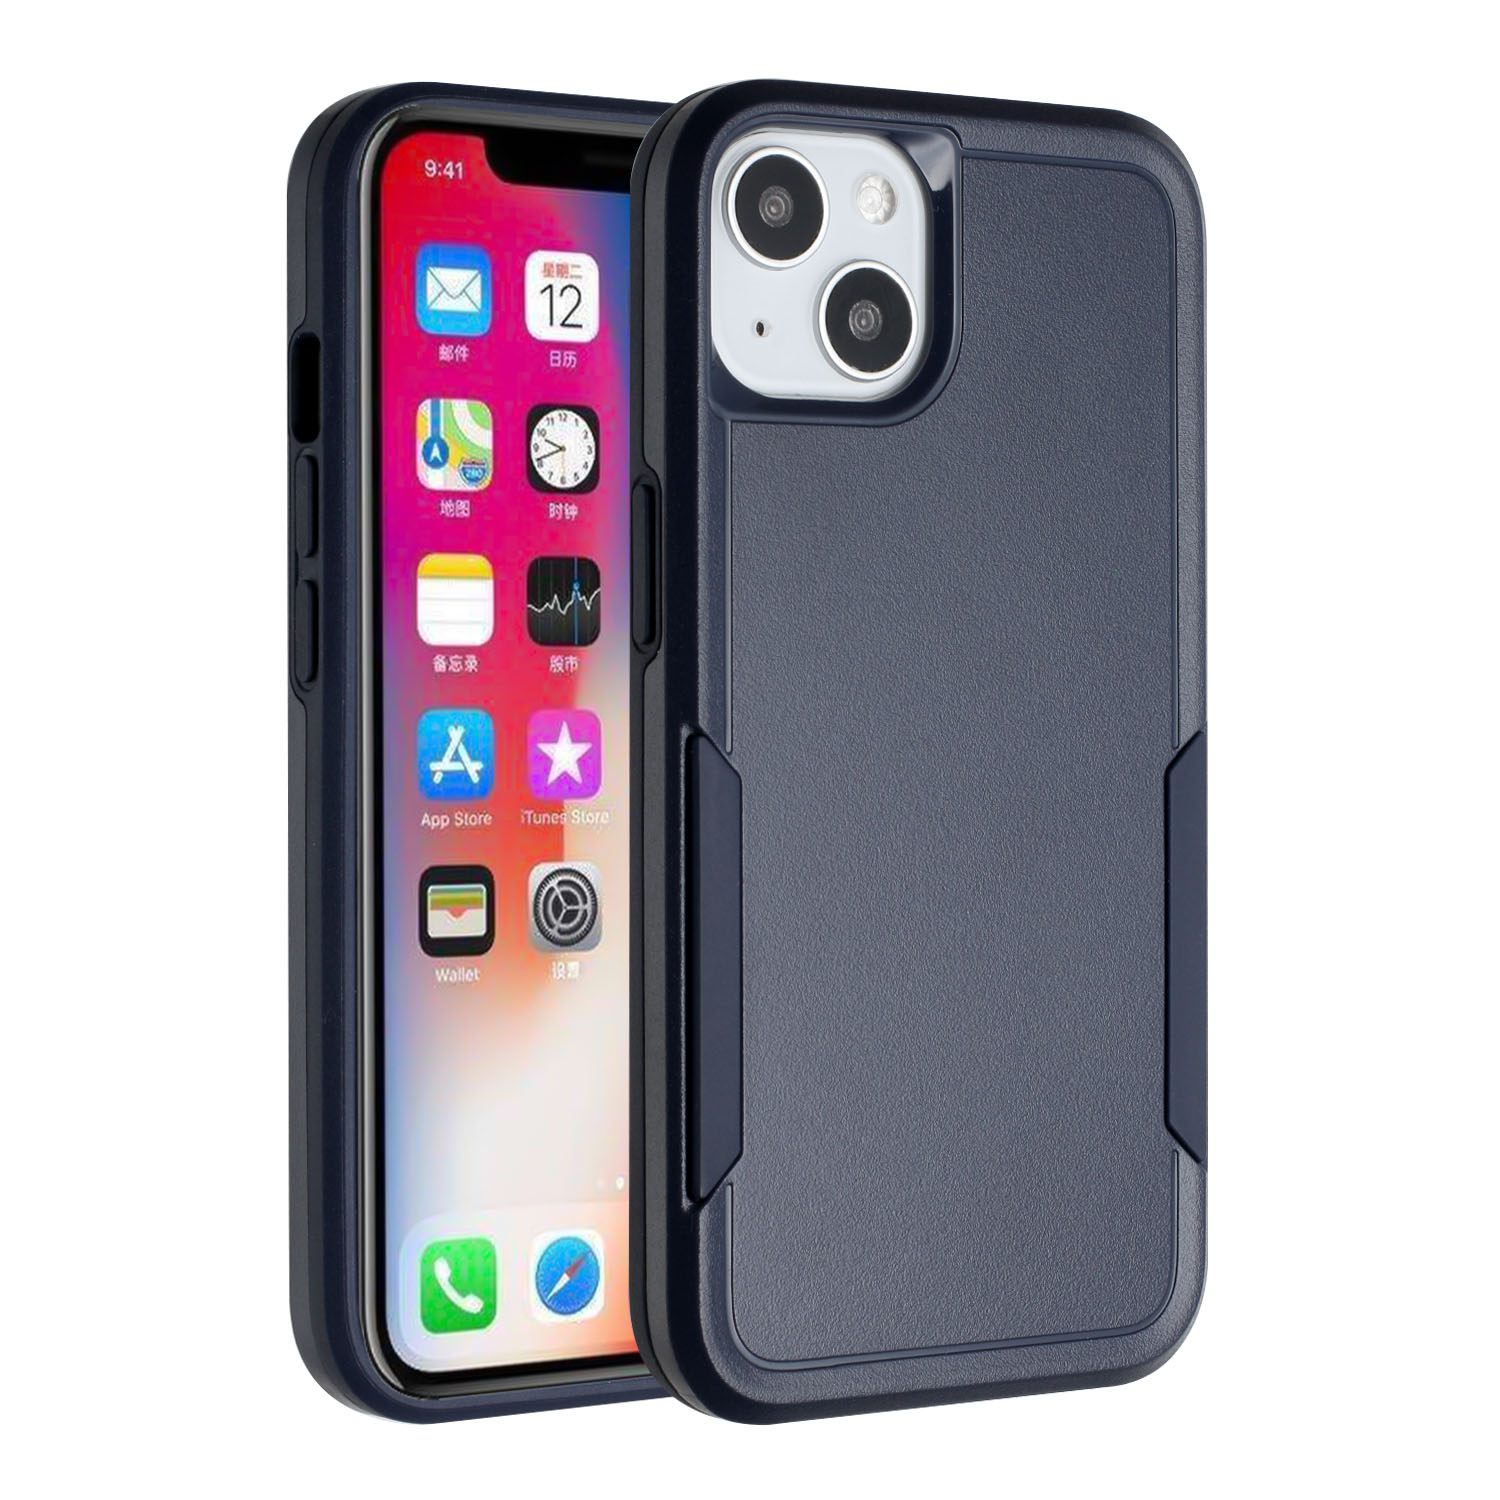 Hybrid Dual Layer iPhone 11 Pro Max Case (Pink) Camera Lens